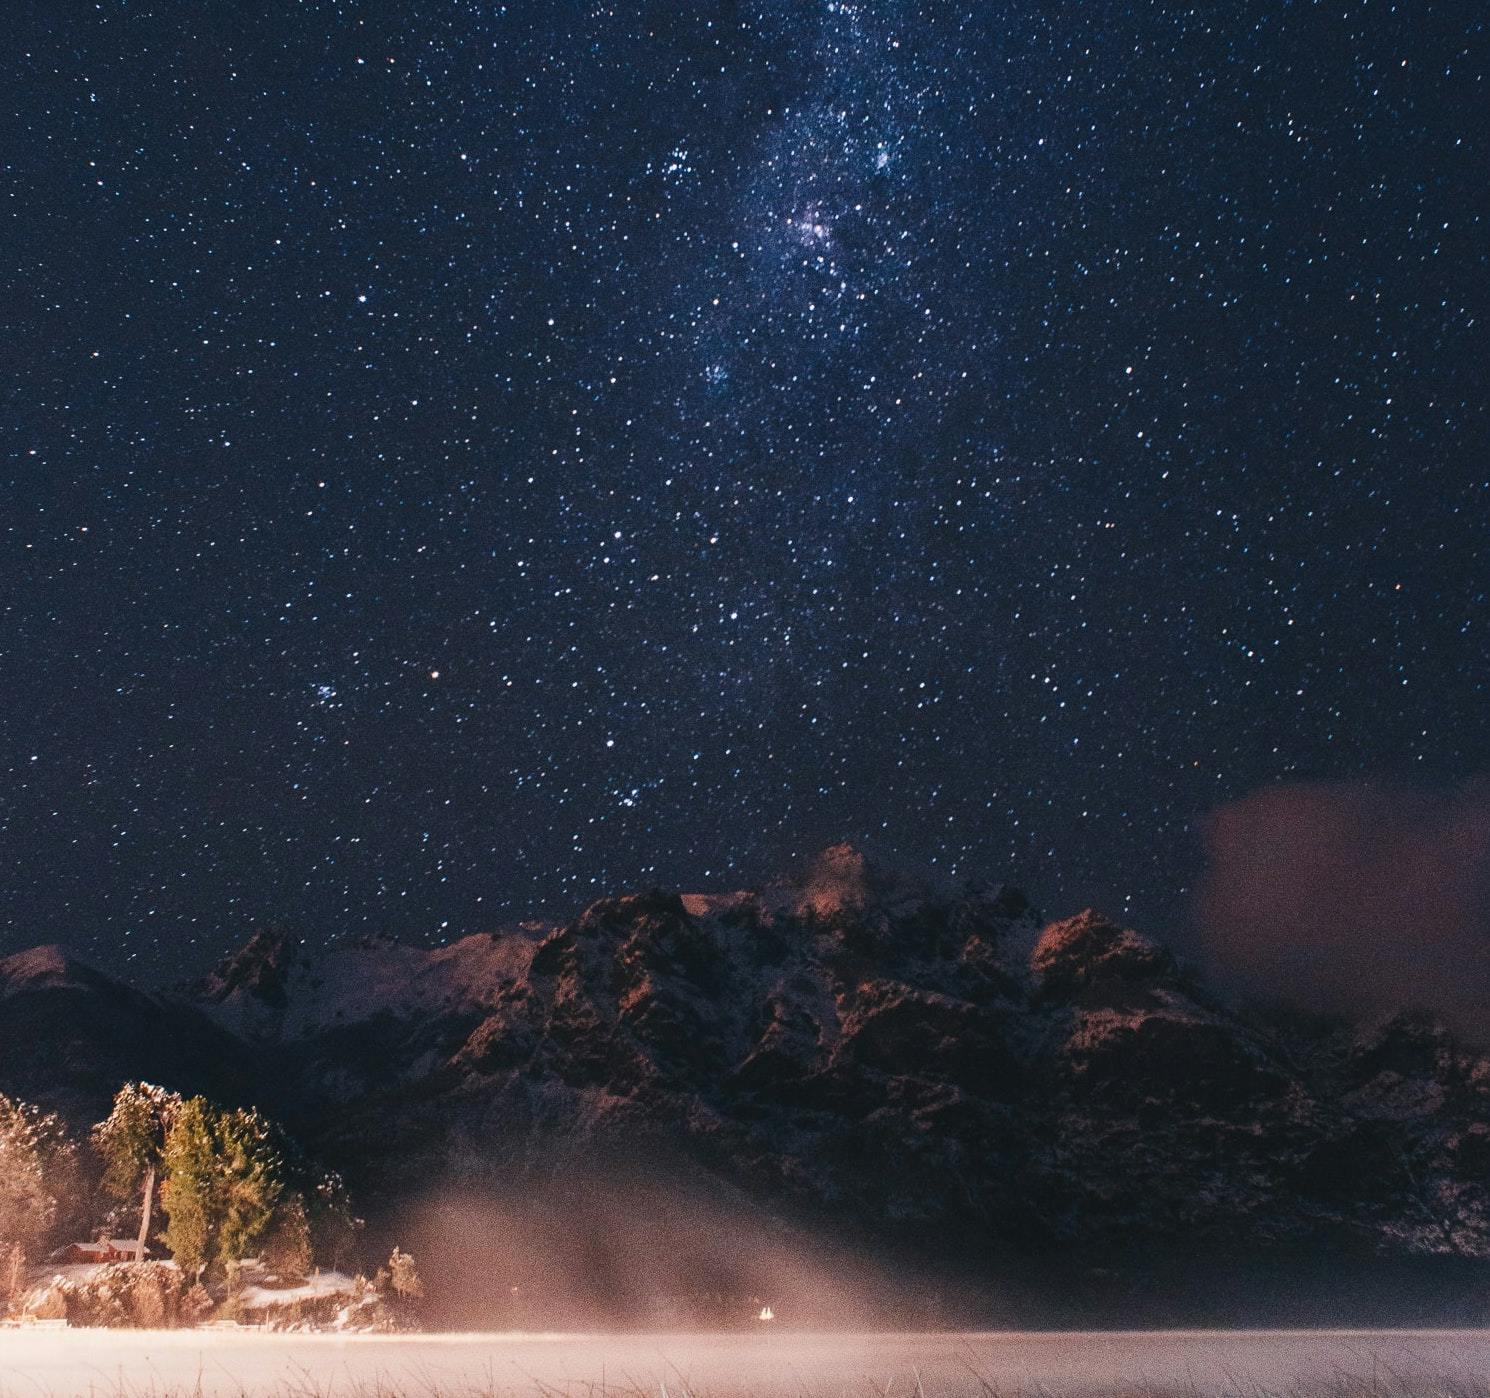 Starry sky with some trees and snowy mountains.